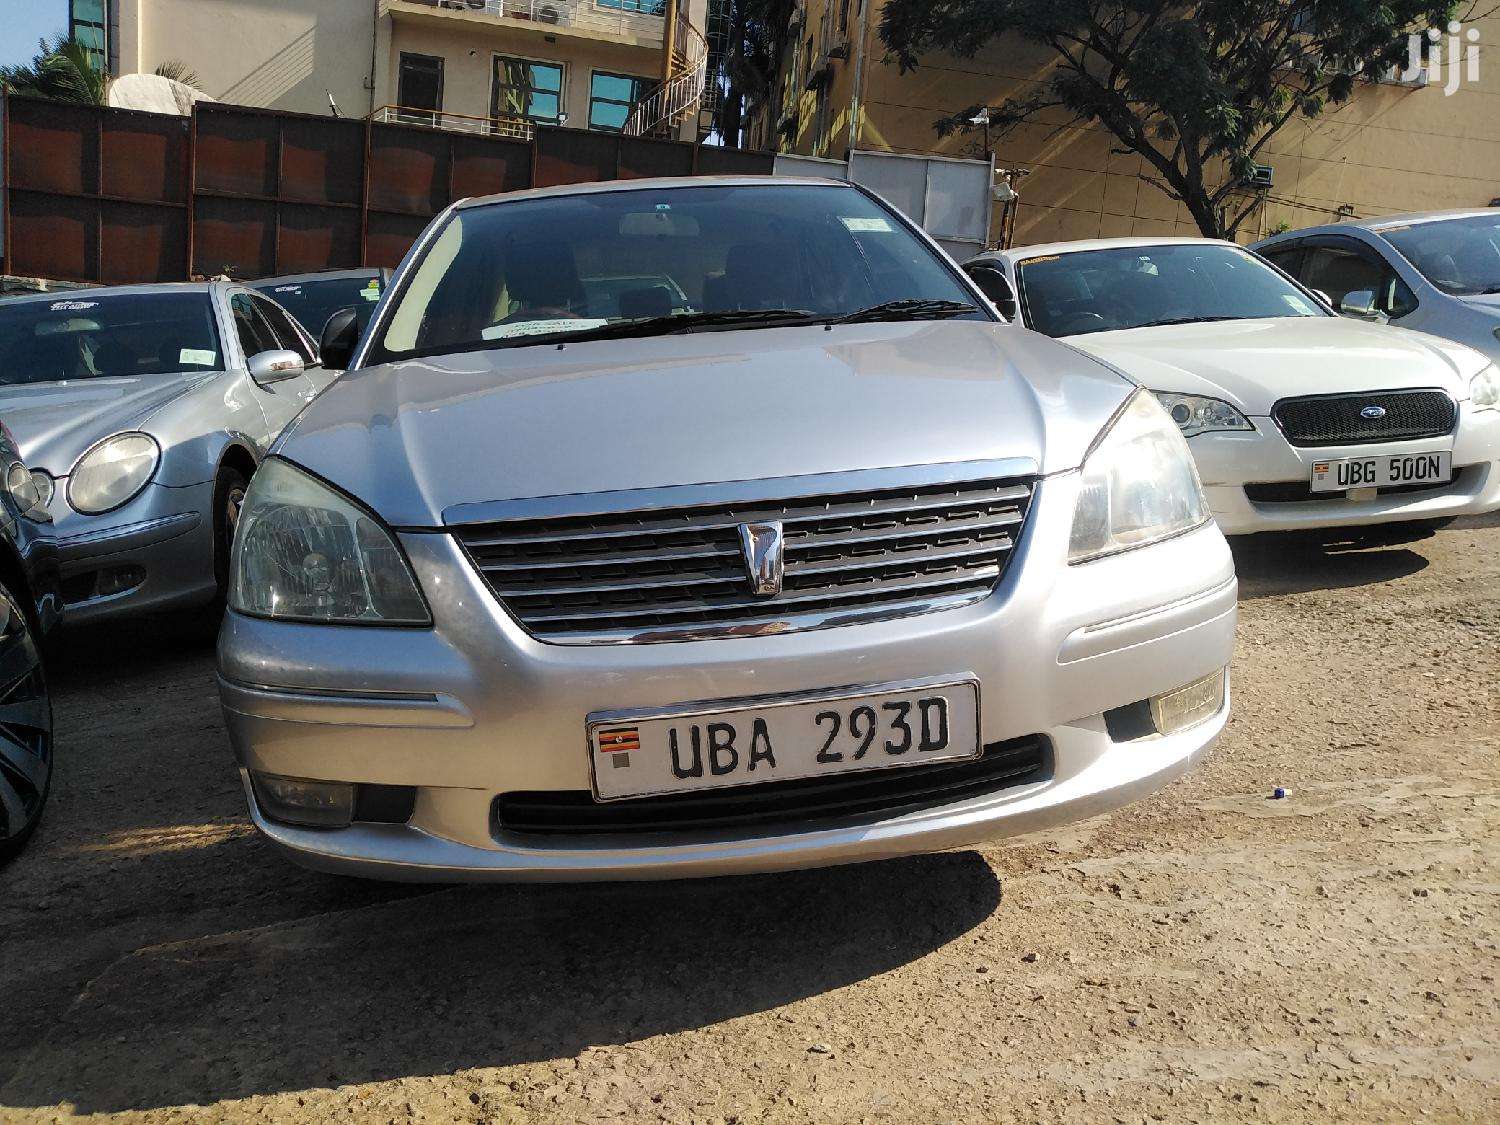 Saloon Cars For Hire In Uganda